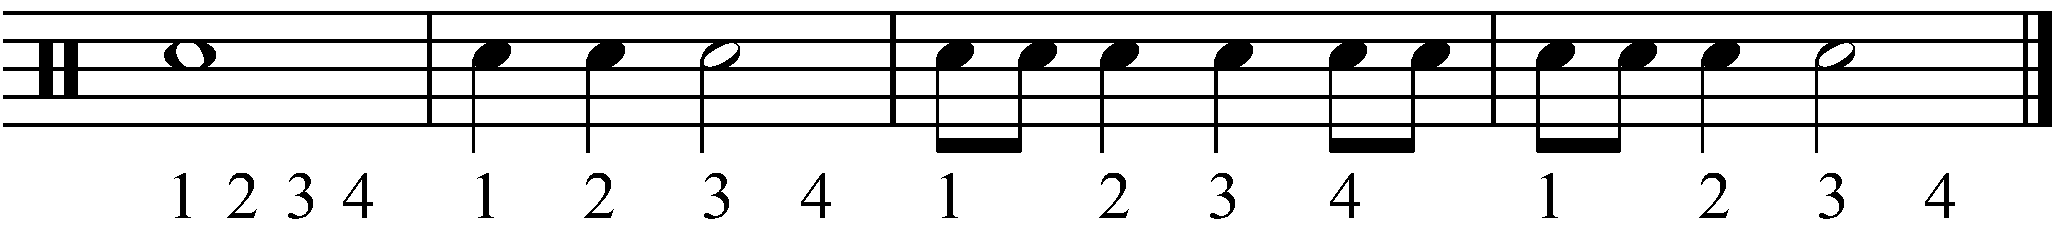 A four bar example snare drum rhythm with numbered counts.